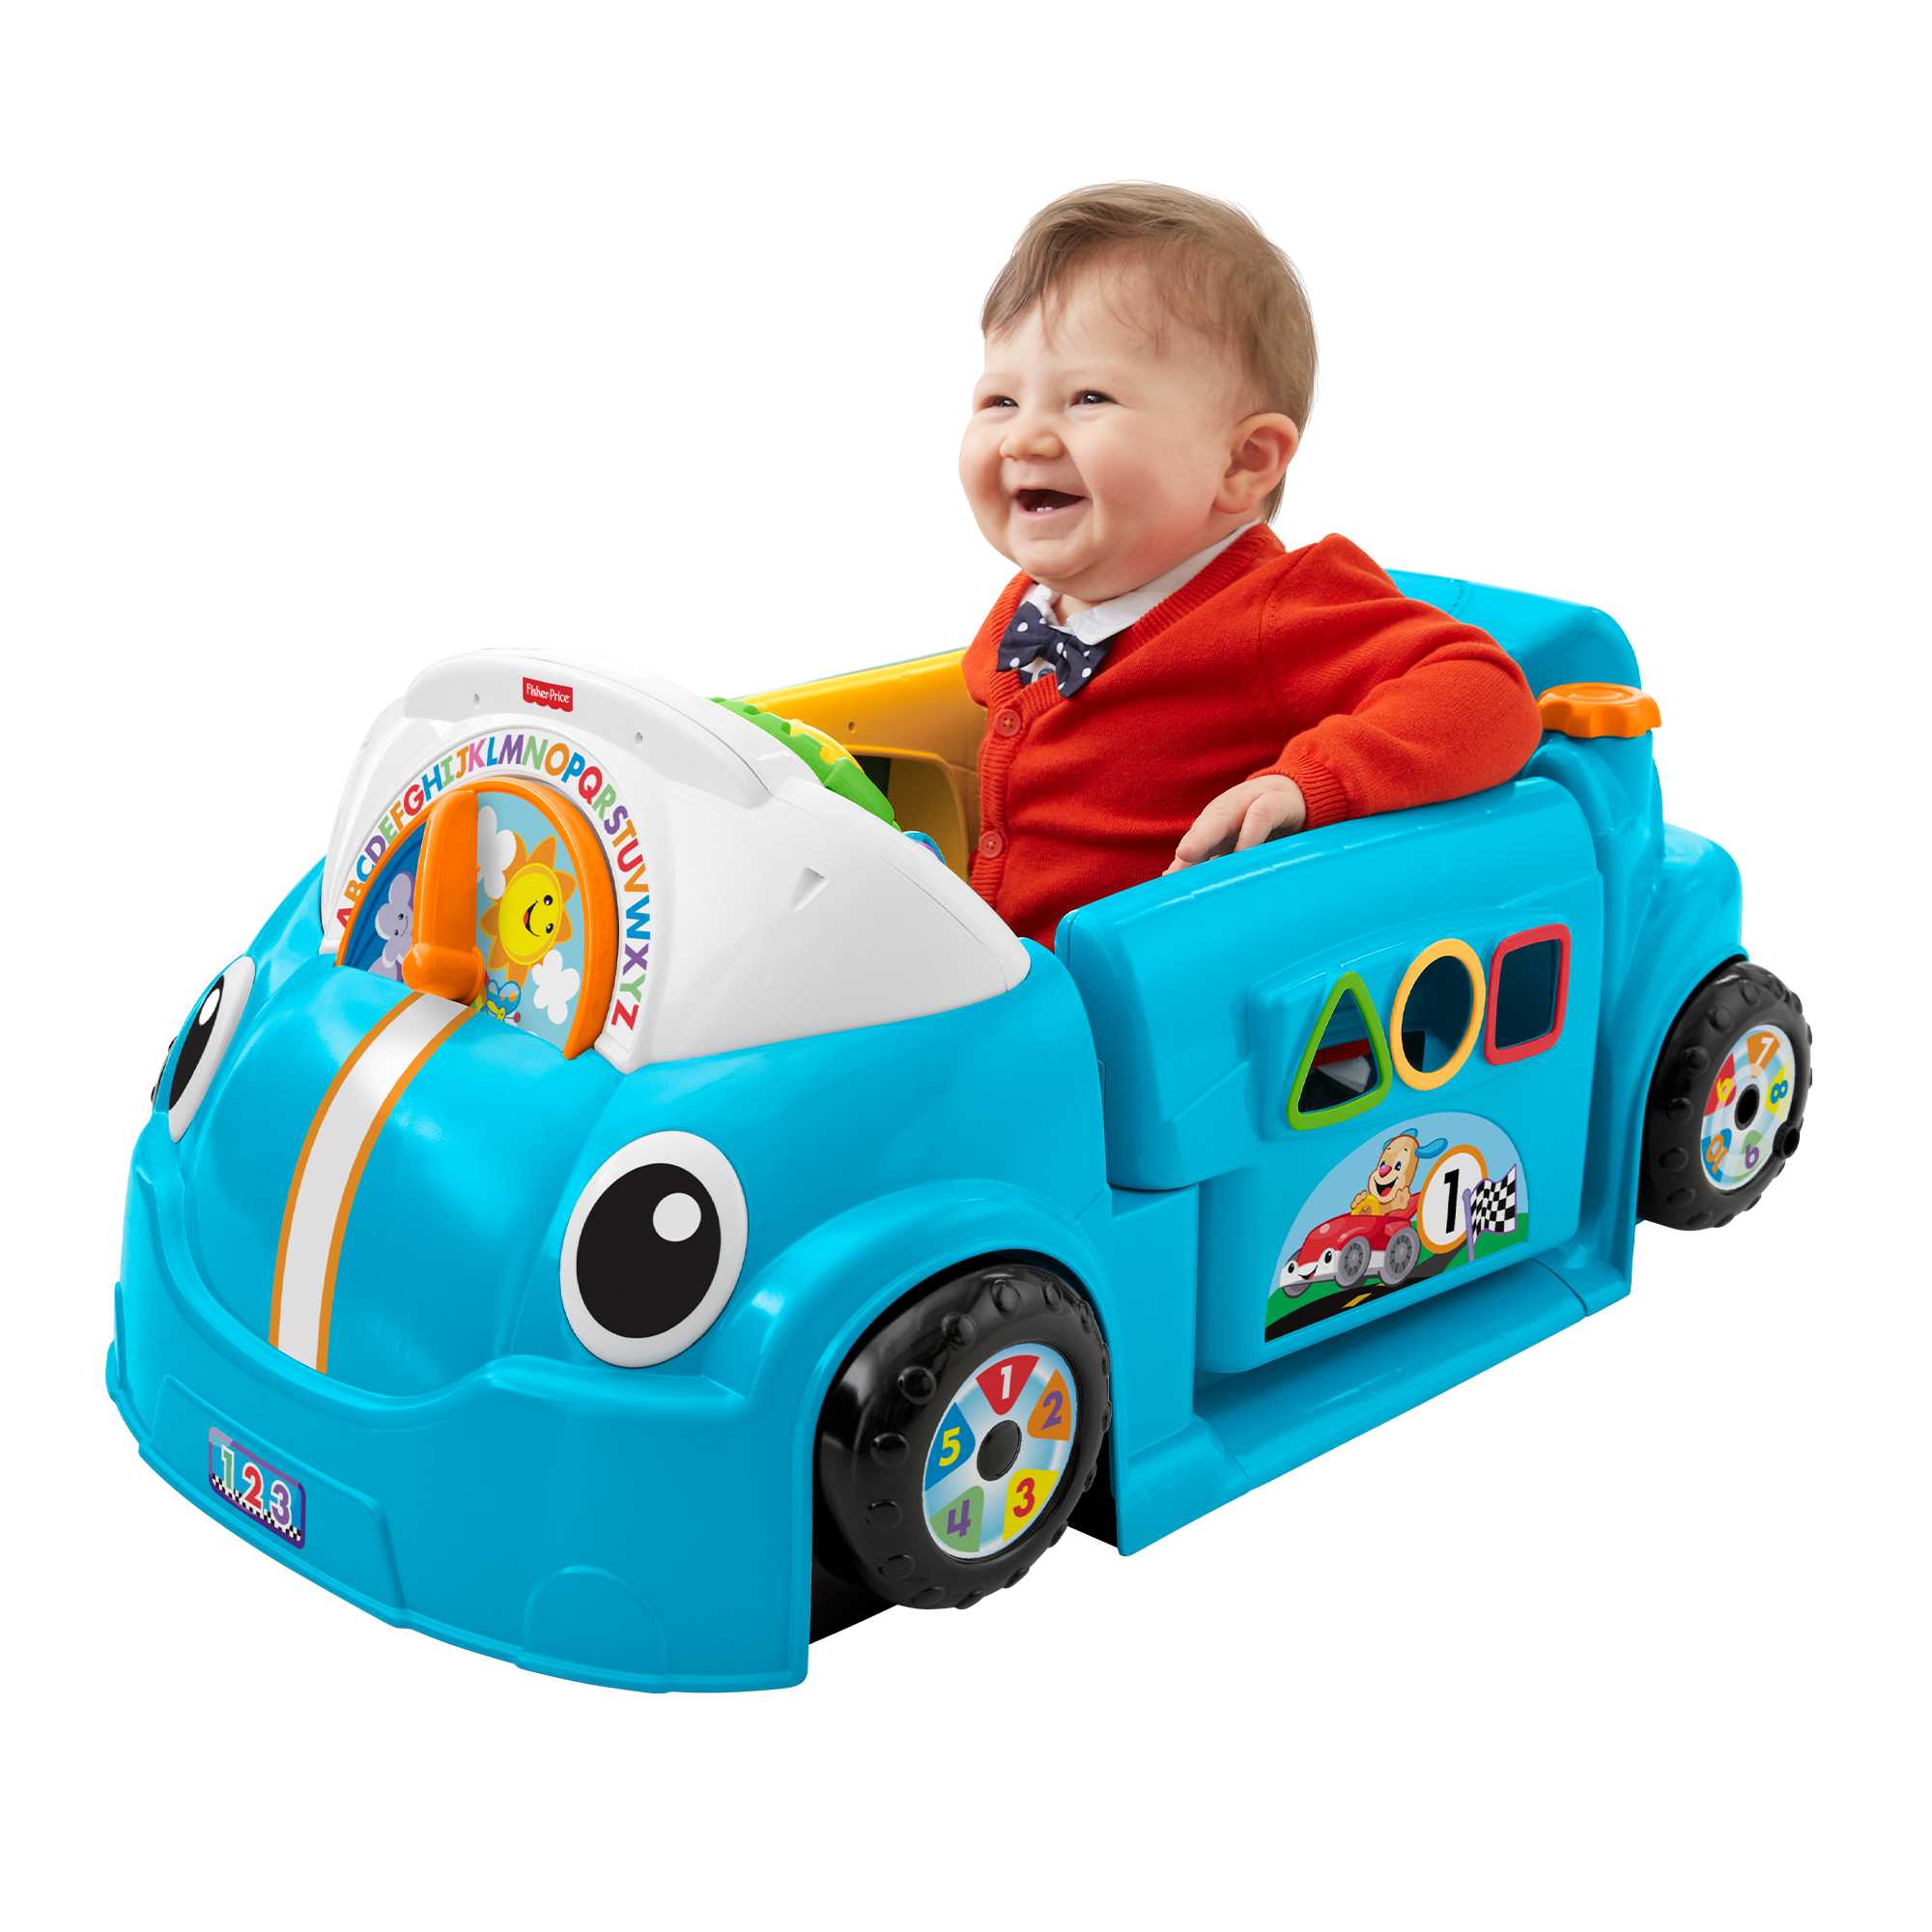 Fisher-Price Laugh & Learn Crawl Around Car, Electronic Learning Toy Activity Center for Baby, Blue - image 1 of 7